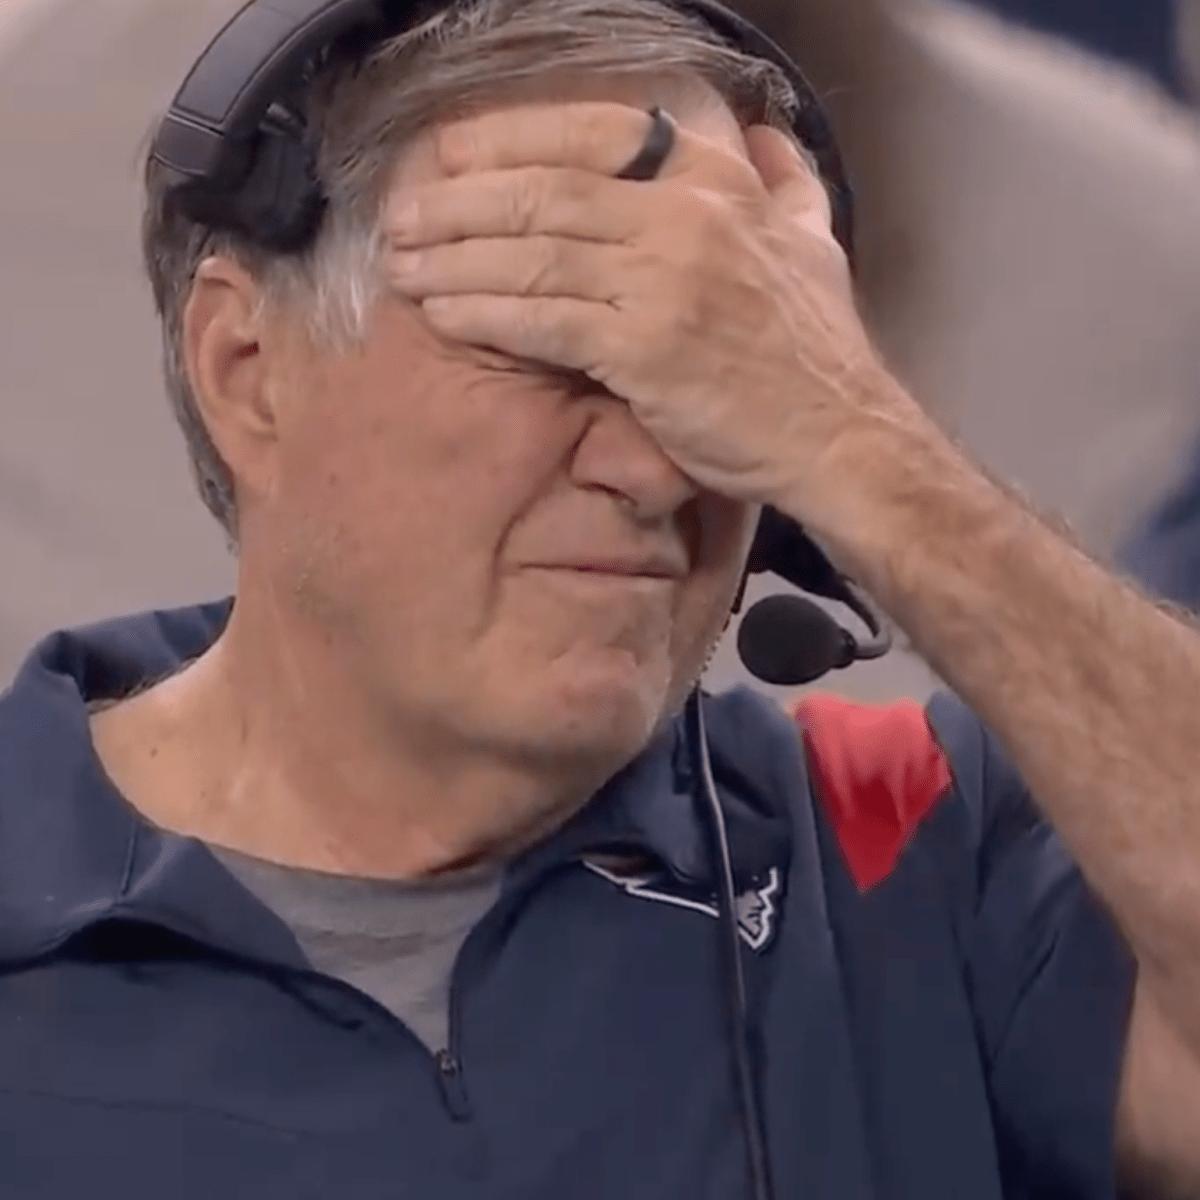 Patriots icon Bill Belichick is suddenly on the verge of the most coaching losses in NFL history.